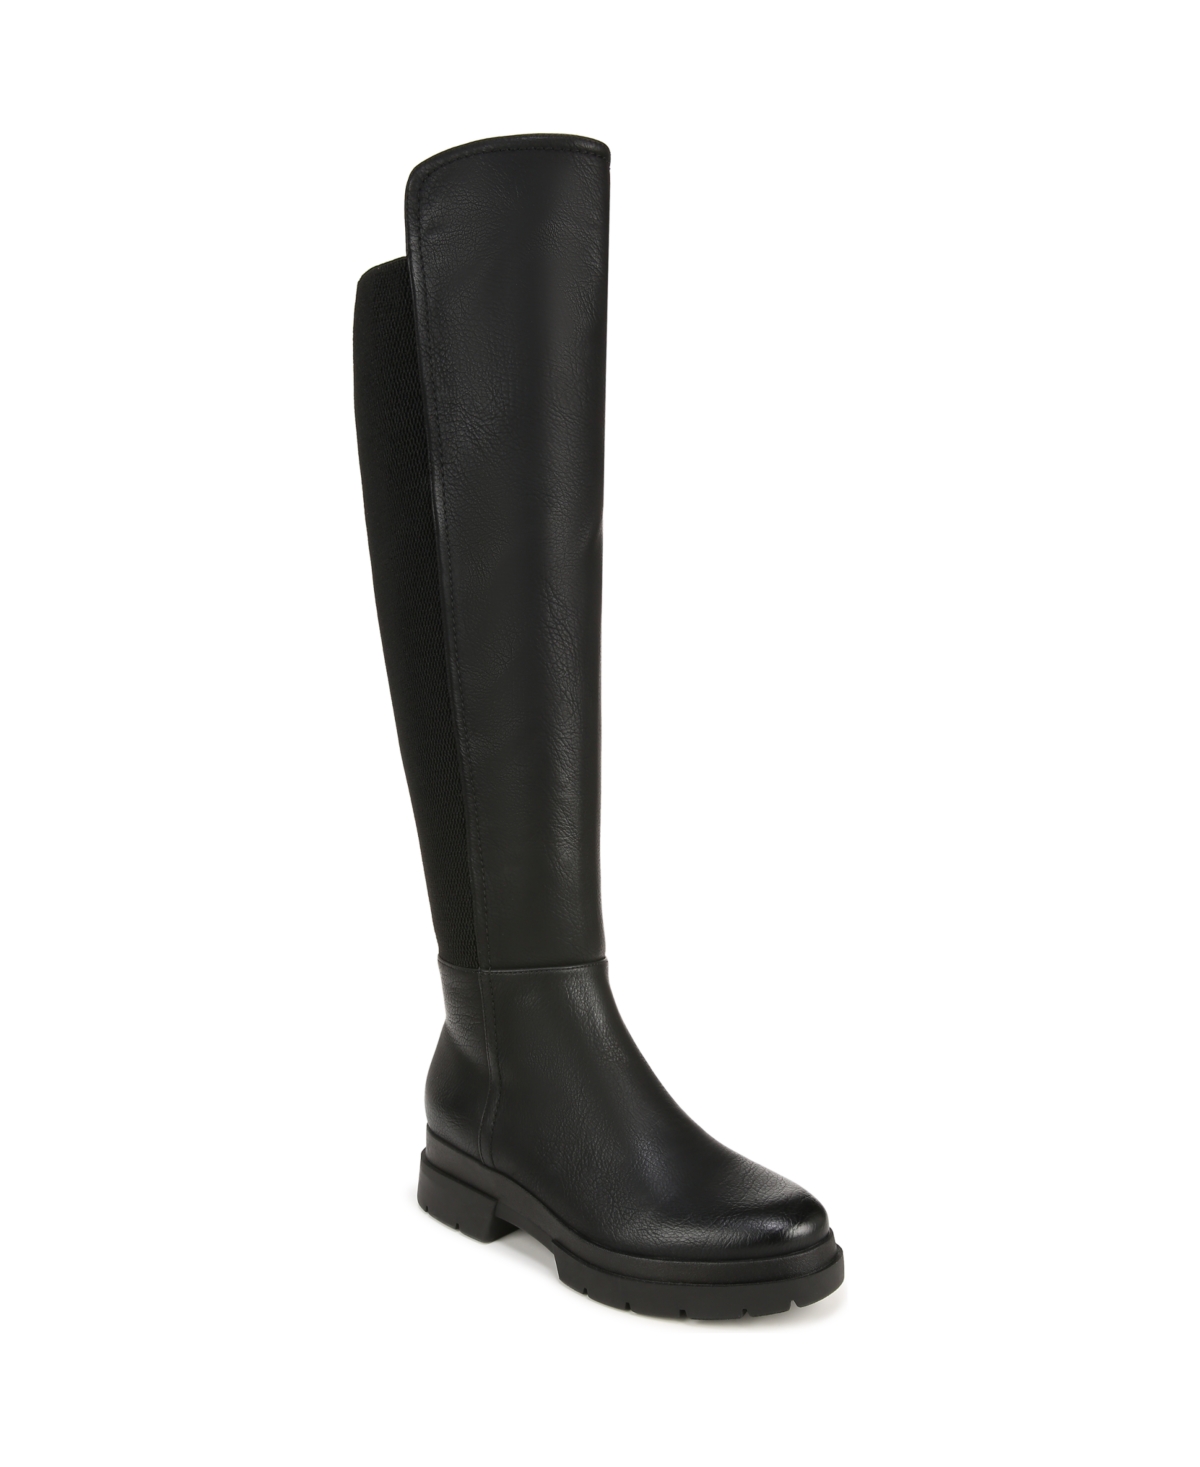 SOUL NATURALIZER OLGA OVER-THE-KNEE BOOTS